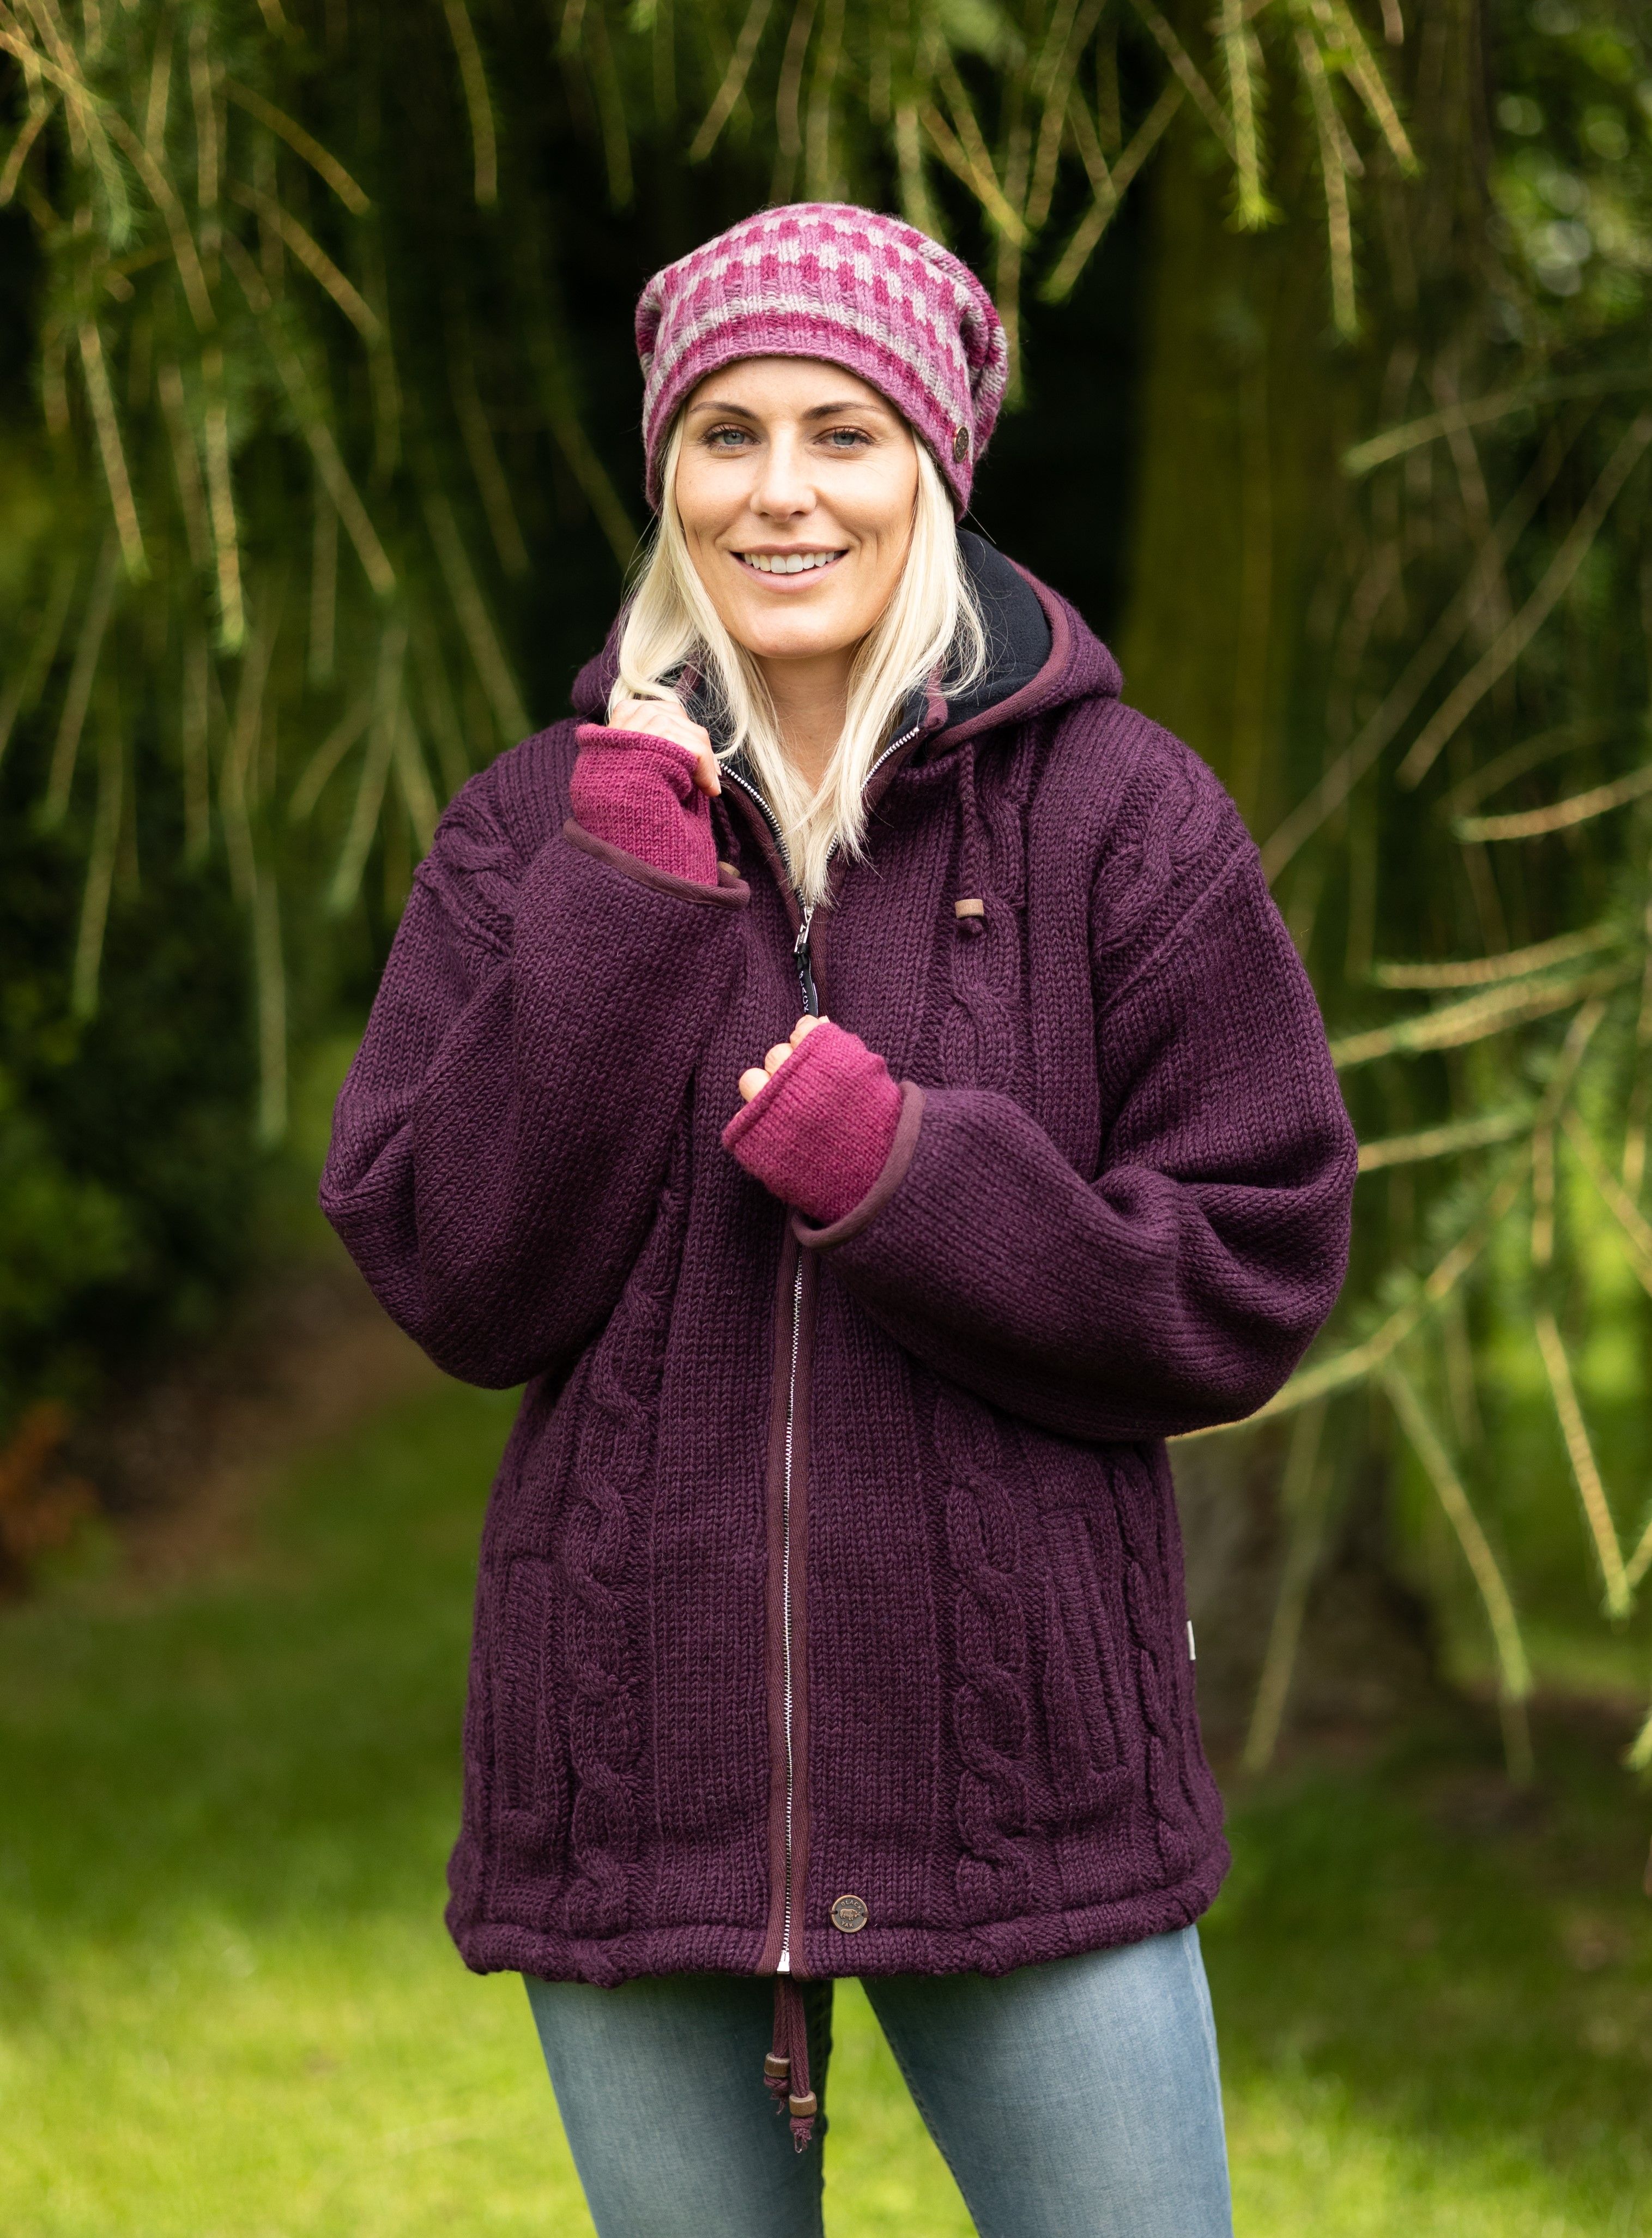 JACKETS.  Beautifully hand knit, lined pure wool jackets with detachable hoods.